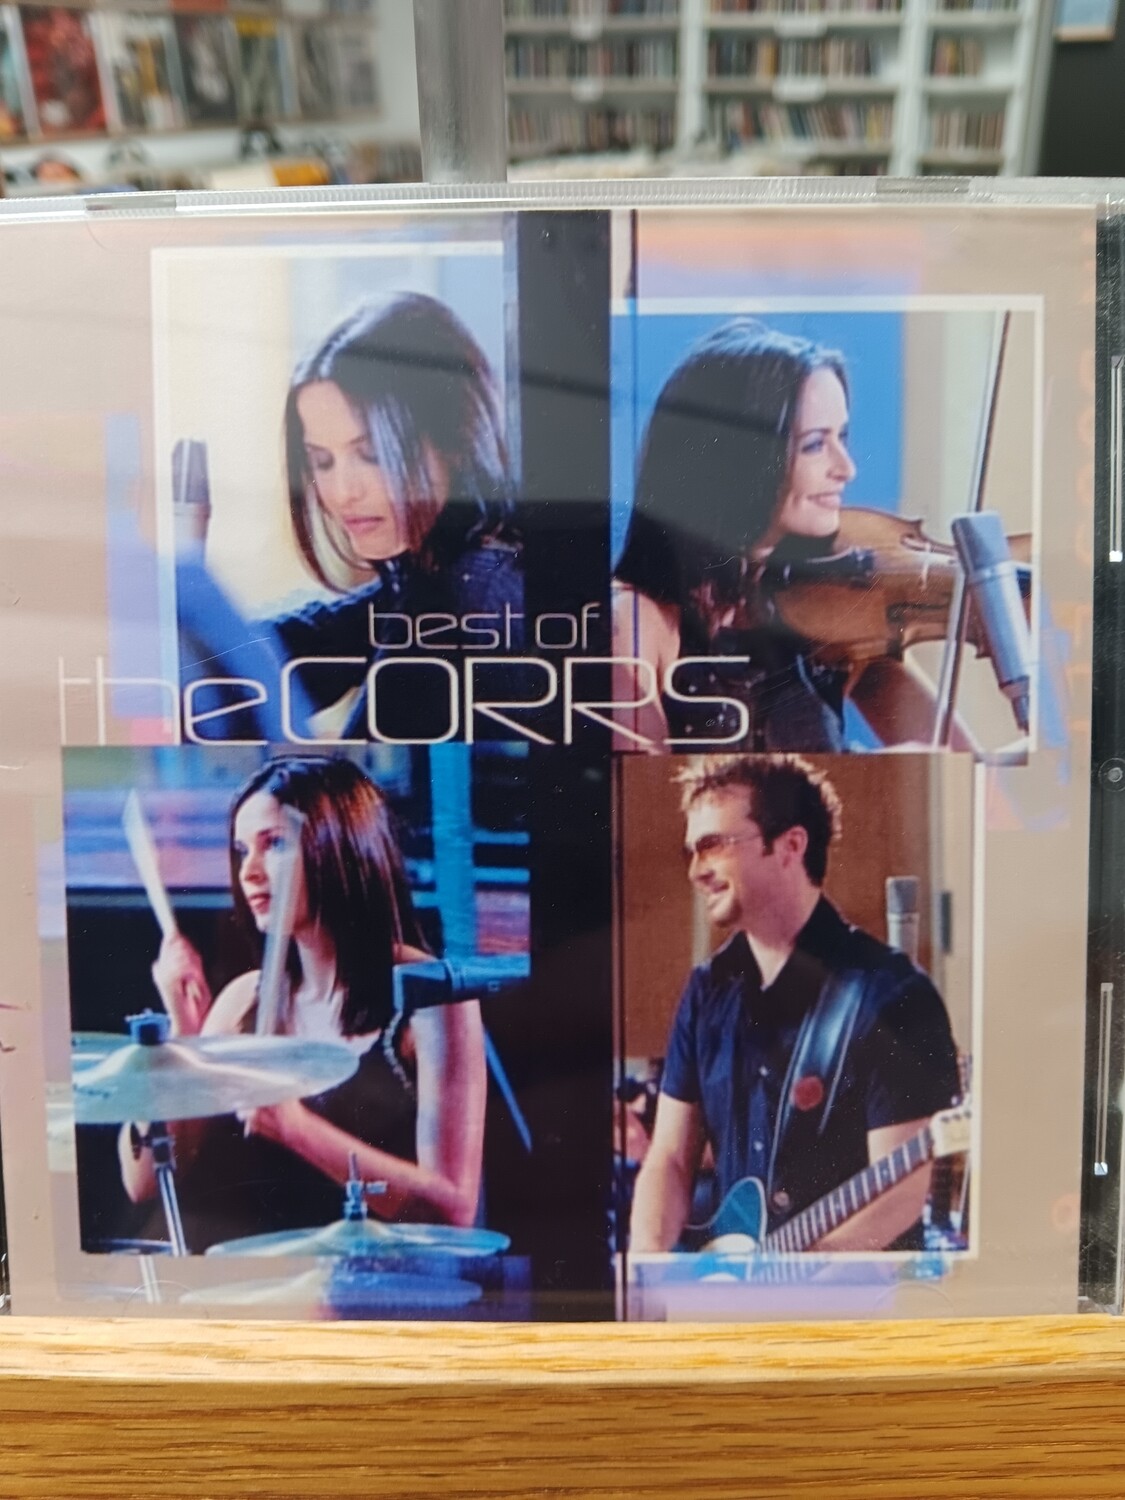 THE CORRS - Best of The Corrs (CD)